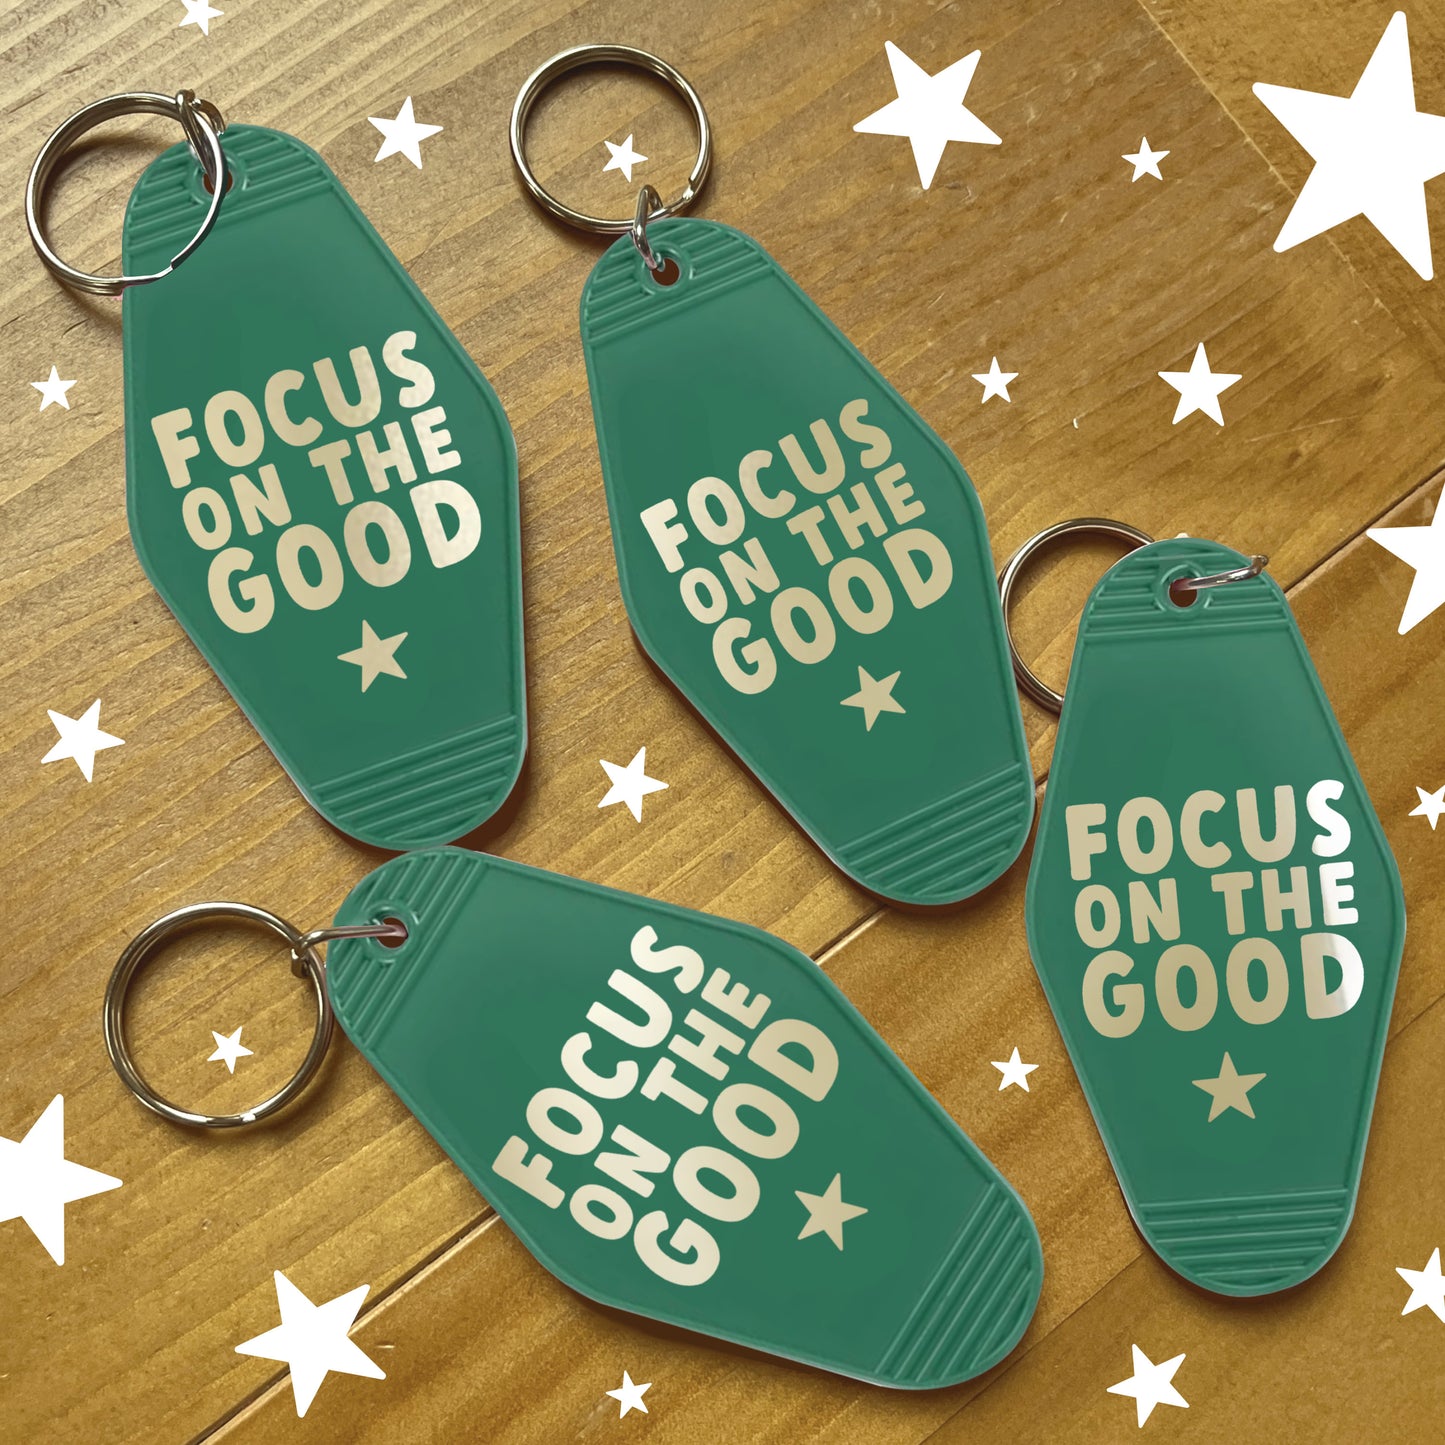 Focus on the Good Keychain | Green Motel Style Keychains, Motivational Quote, Inspirational Quote, Gift Ideas, Mental Health Gifts